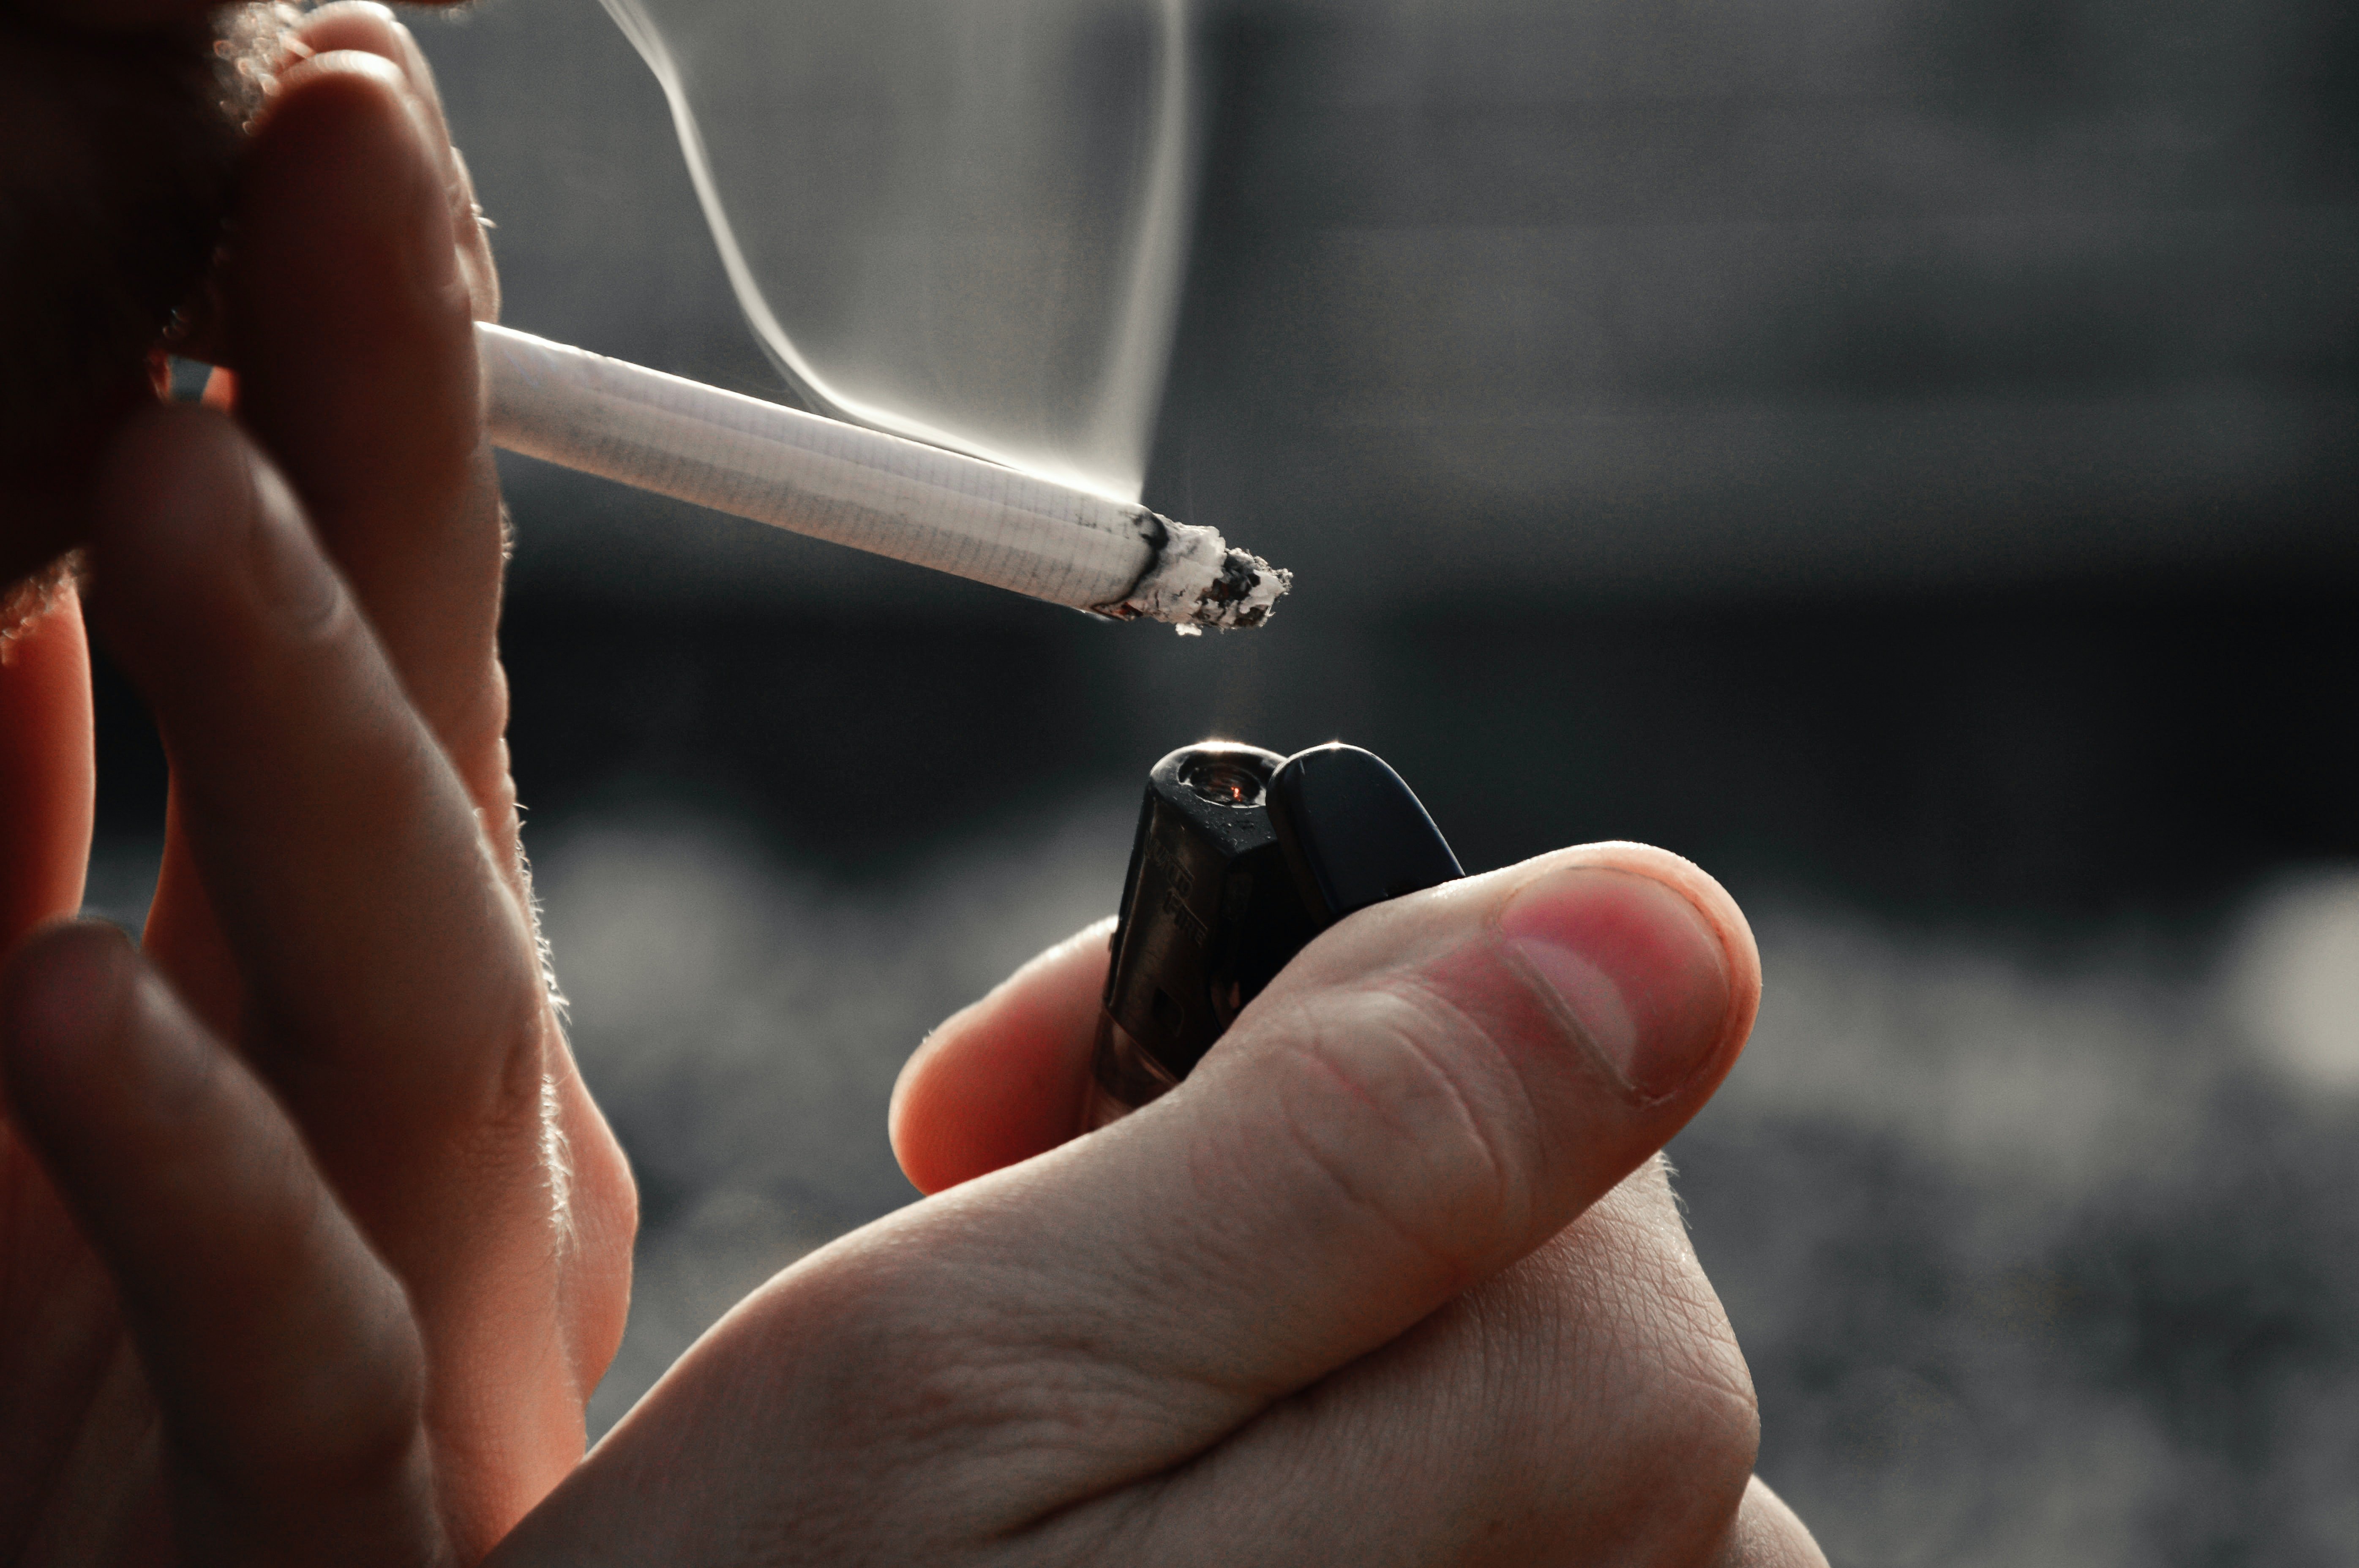 The man enjoyed the best cigarette in his life. | Photo: Pexels/Every Thing